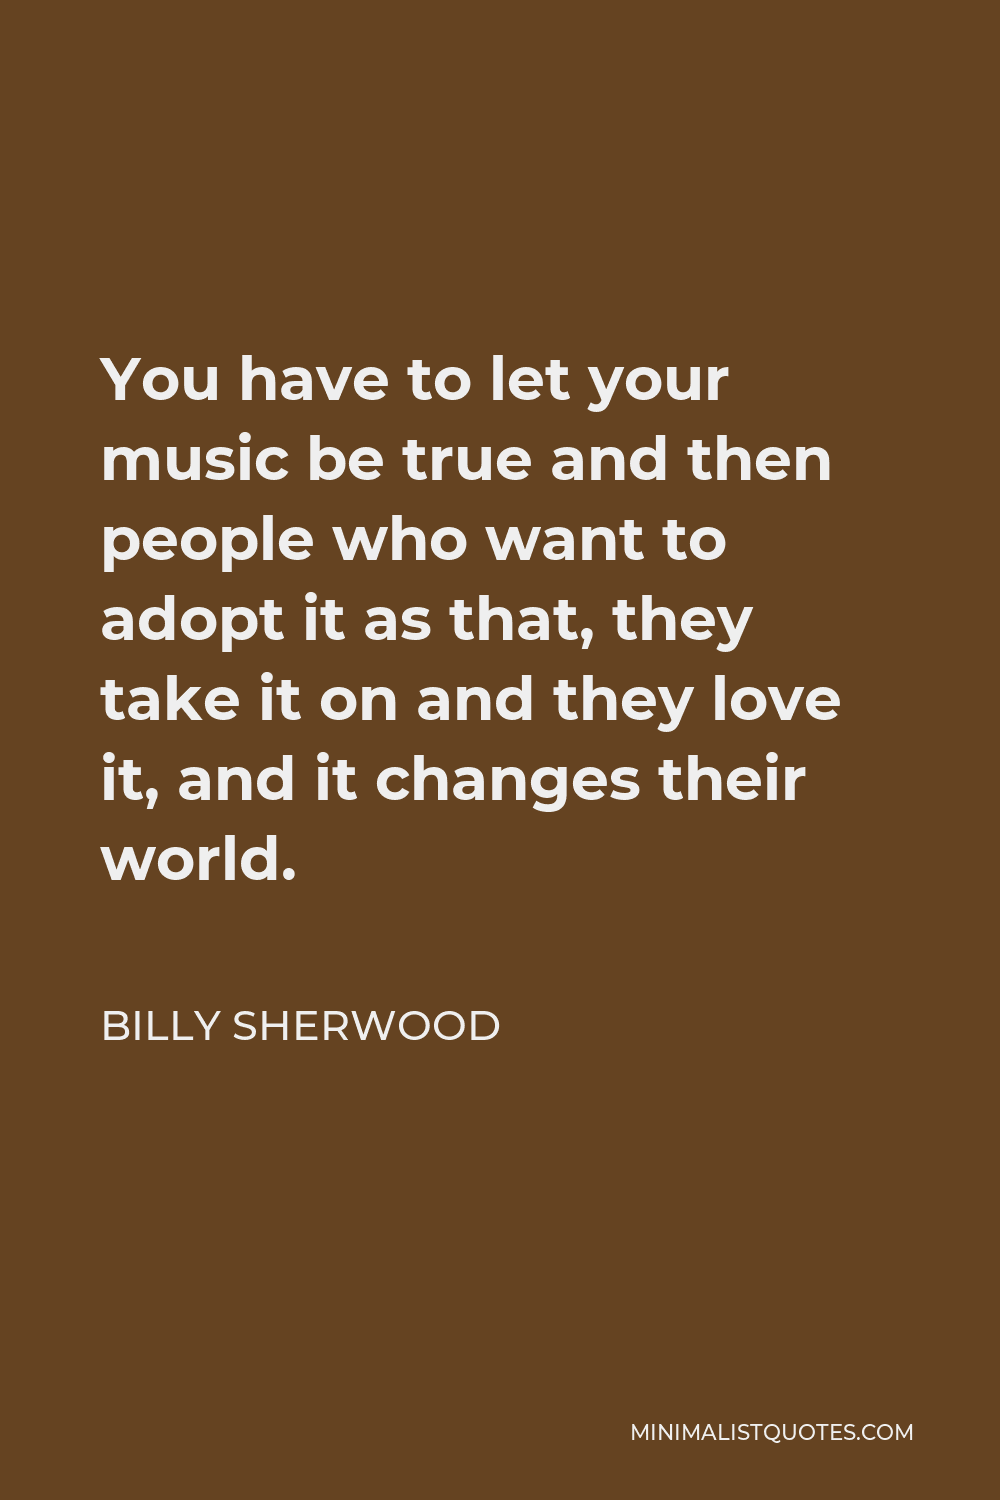 Billy Sherwood Quote - You have to let your music be true and then people who want to adopt it as that, they take it on and they love it, and it changes their world.